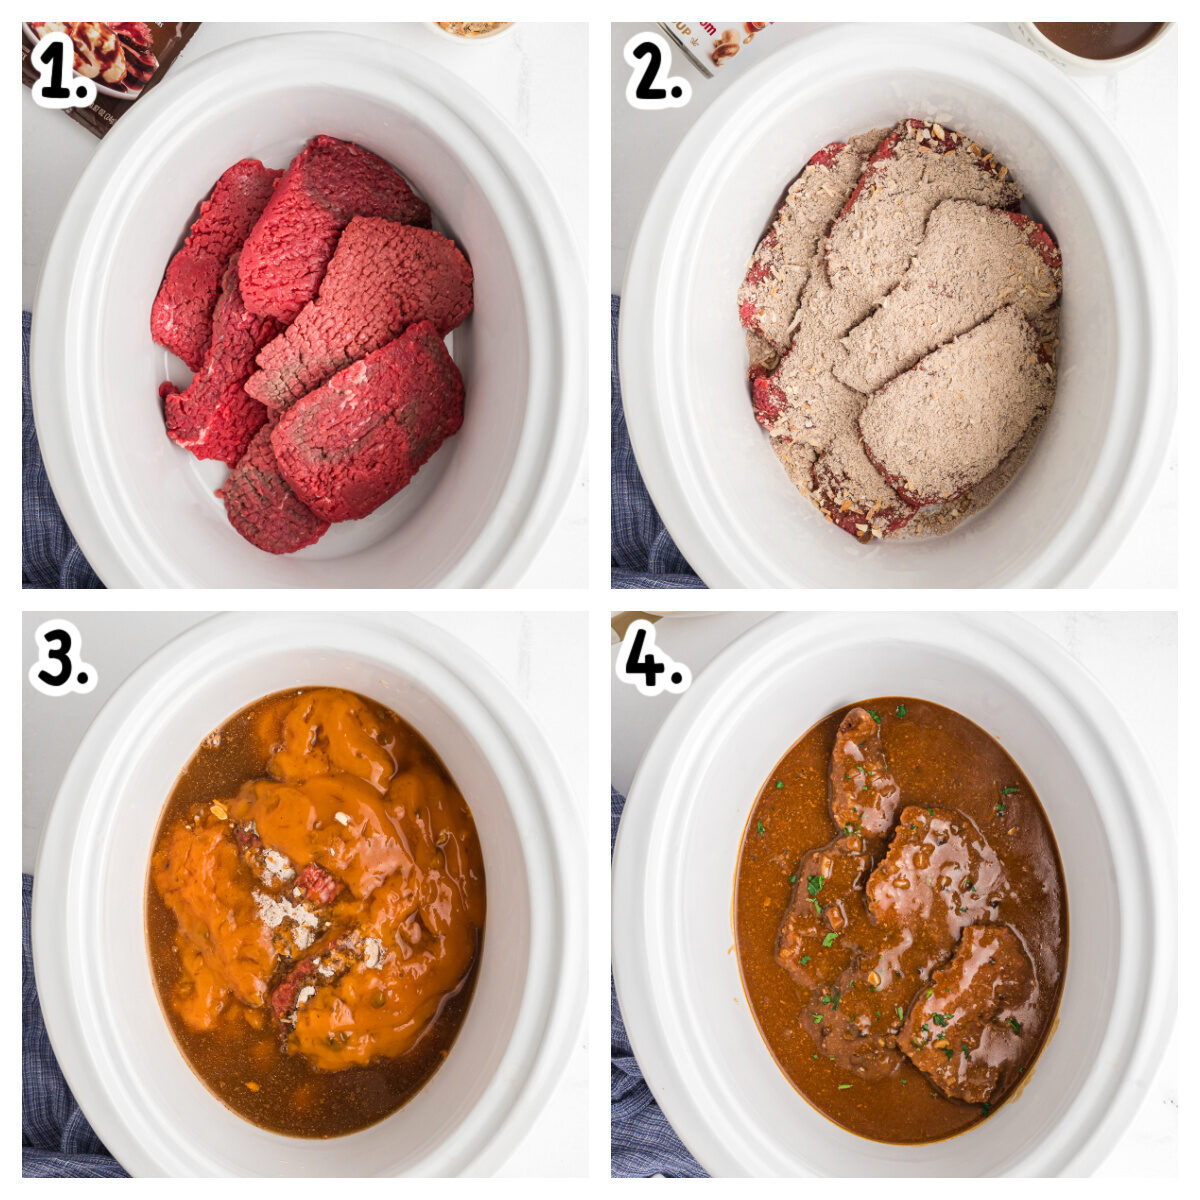 Four images showing how to make cube steak in a crockpot.